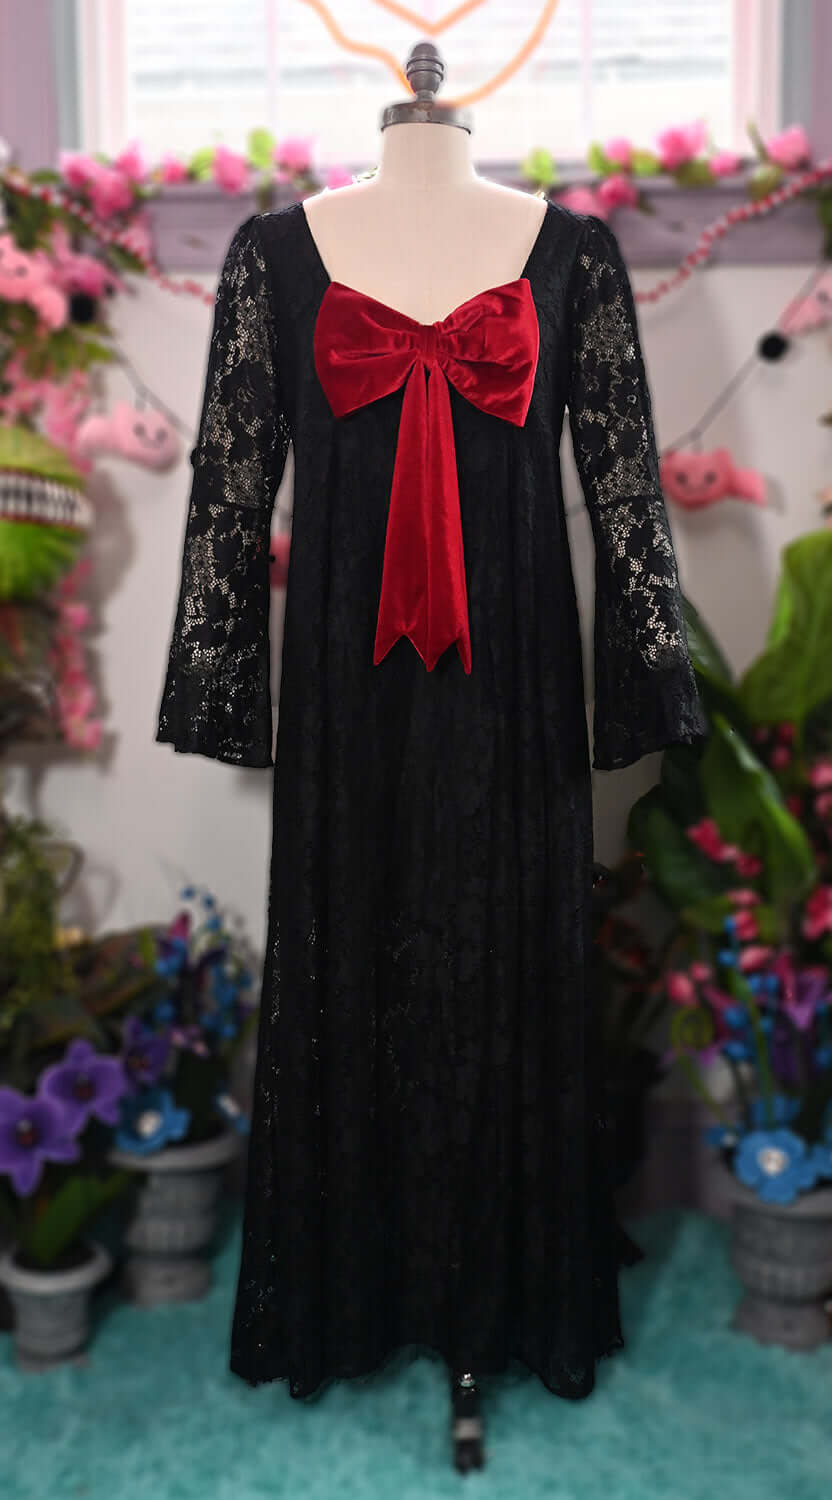 WAX POETIC Priscilla 60's Bell Sleeve Lace Maxi Dress in Black